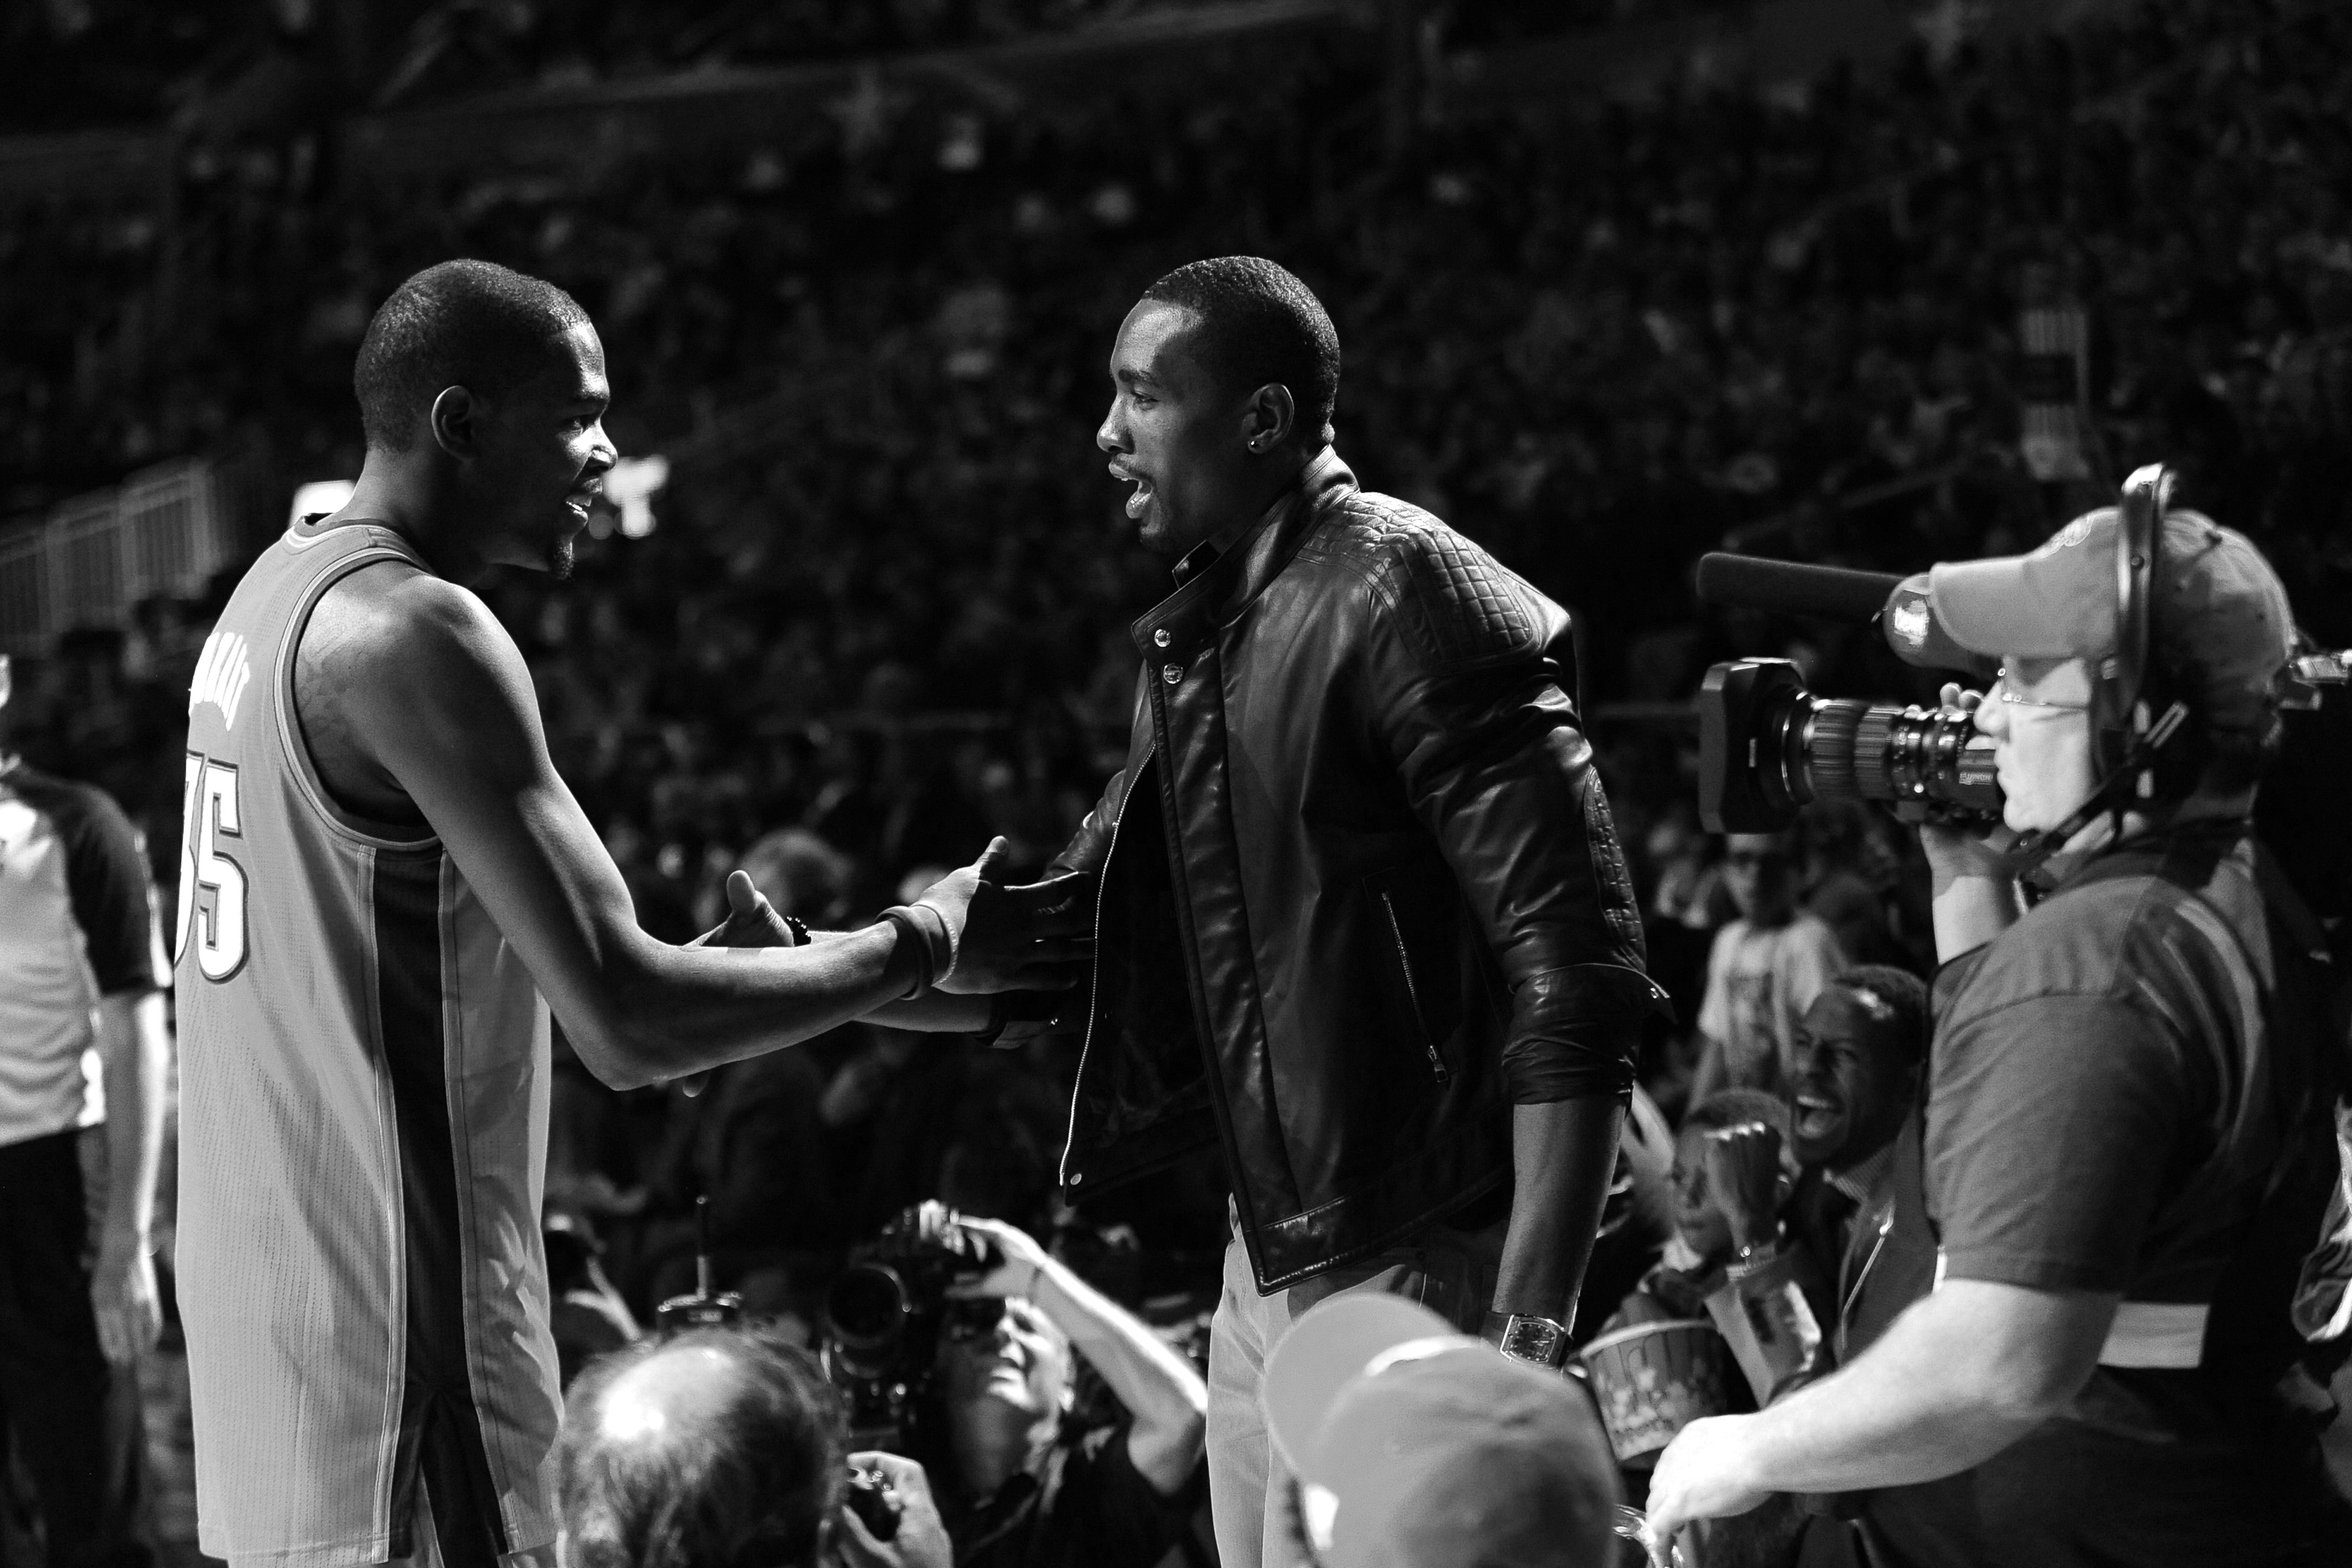 ORLANDO, FL - FEBRUARY 25: Kevin Durant #35 and Serge Ibaka #9 of the Oklahoma City Thunder shake hands during the Foot Locker Three-Point Contest as part of 2012 All-Star Weekend at the Amway Center on February 25, 2012 in Orlando, Florida. NOTE TO USER: User expressly acknowledges and agrees that, by downloading and/or using this photograph, user is consenting to the terms and conditions of the Getty Images License Agreement. Mandatory Copyright Notice: Copyright 2012 NBAE (Photo by Noah Graham/NBAE via Getty Images)